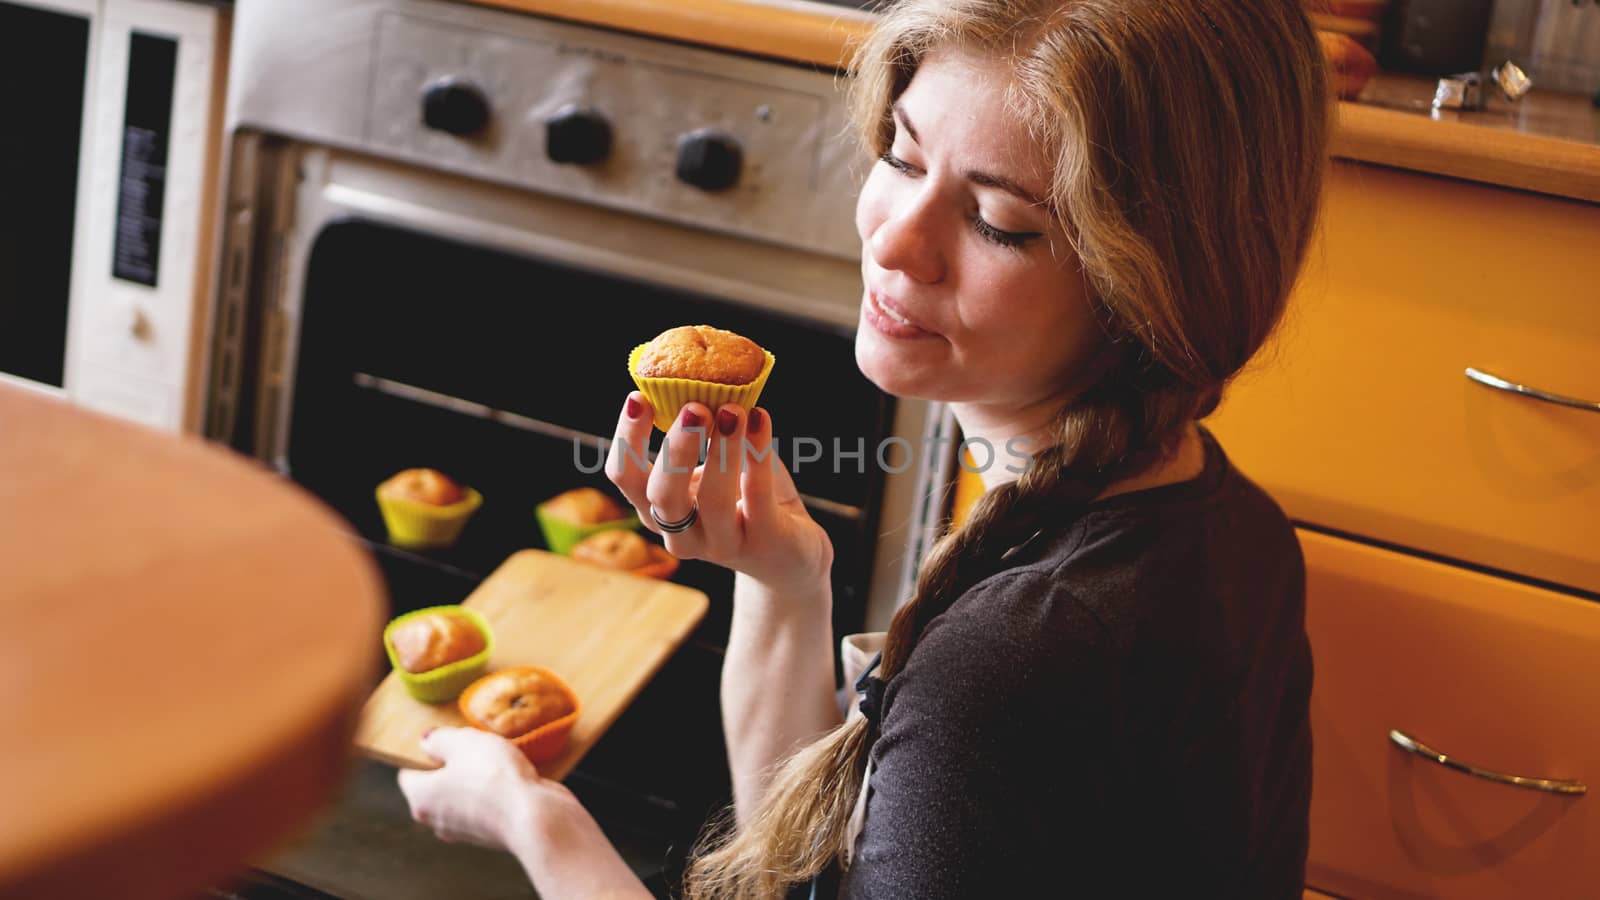 Beautiful blonde woman showing muffins in a kitchen by natali_brill